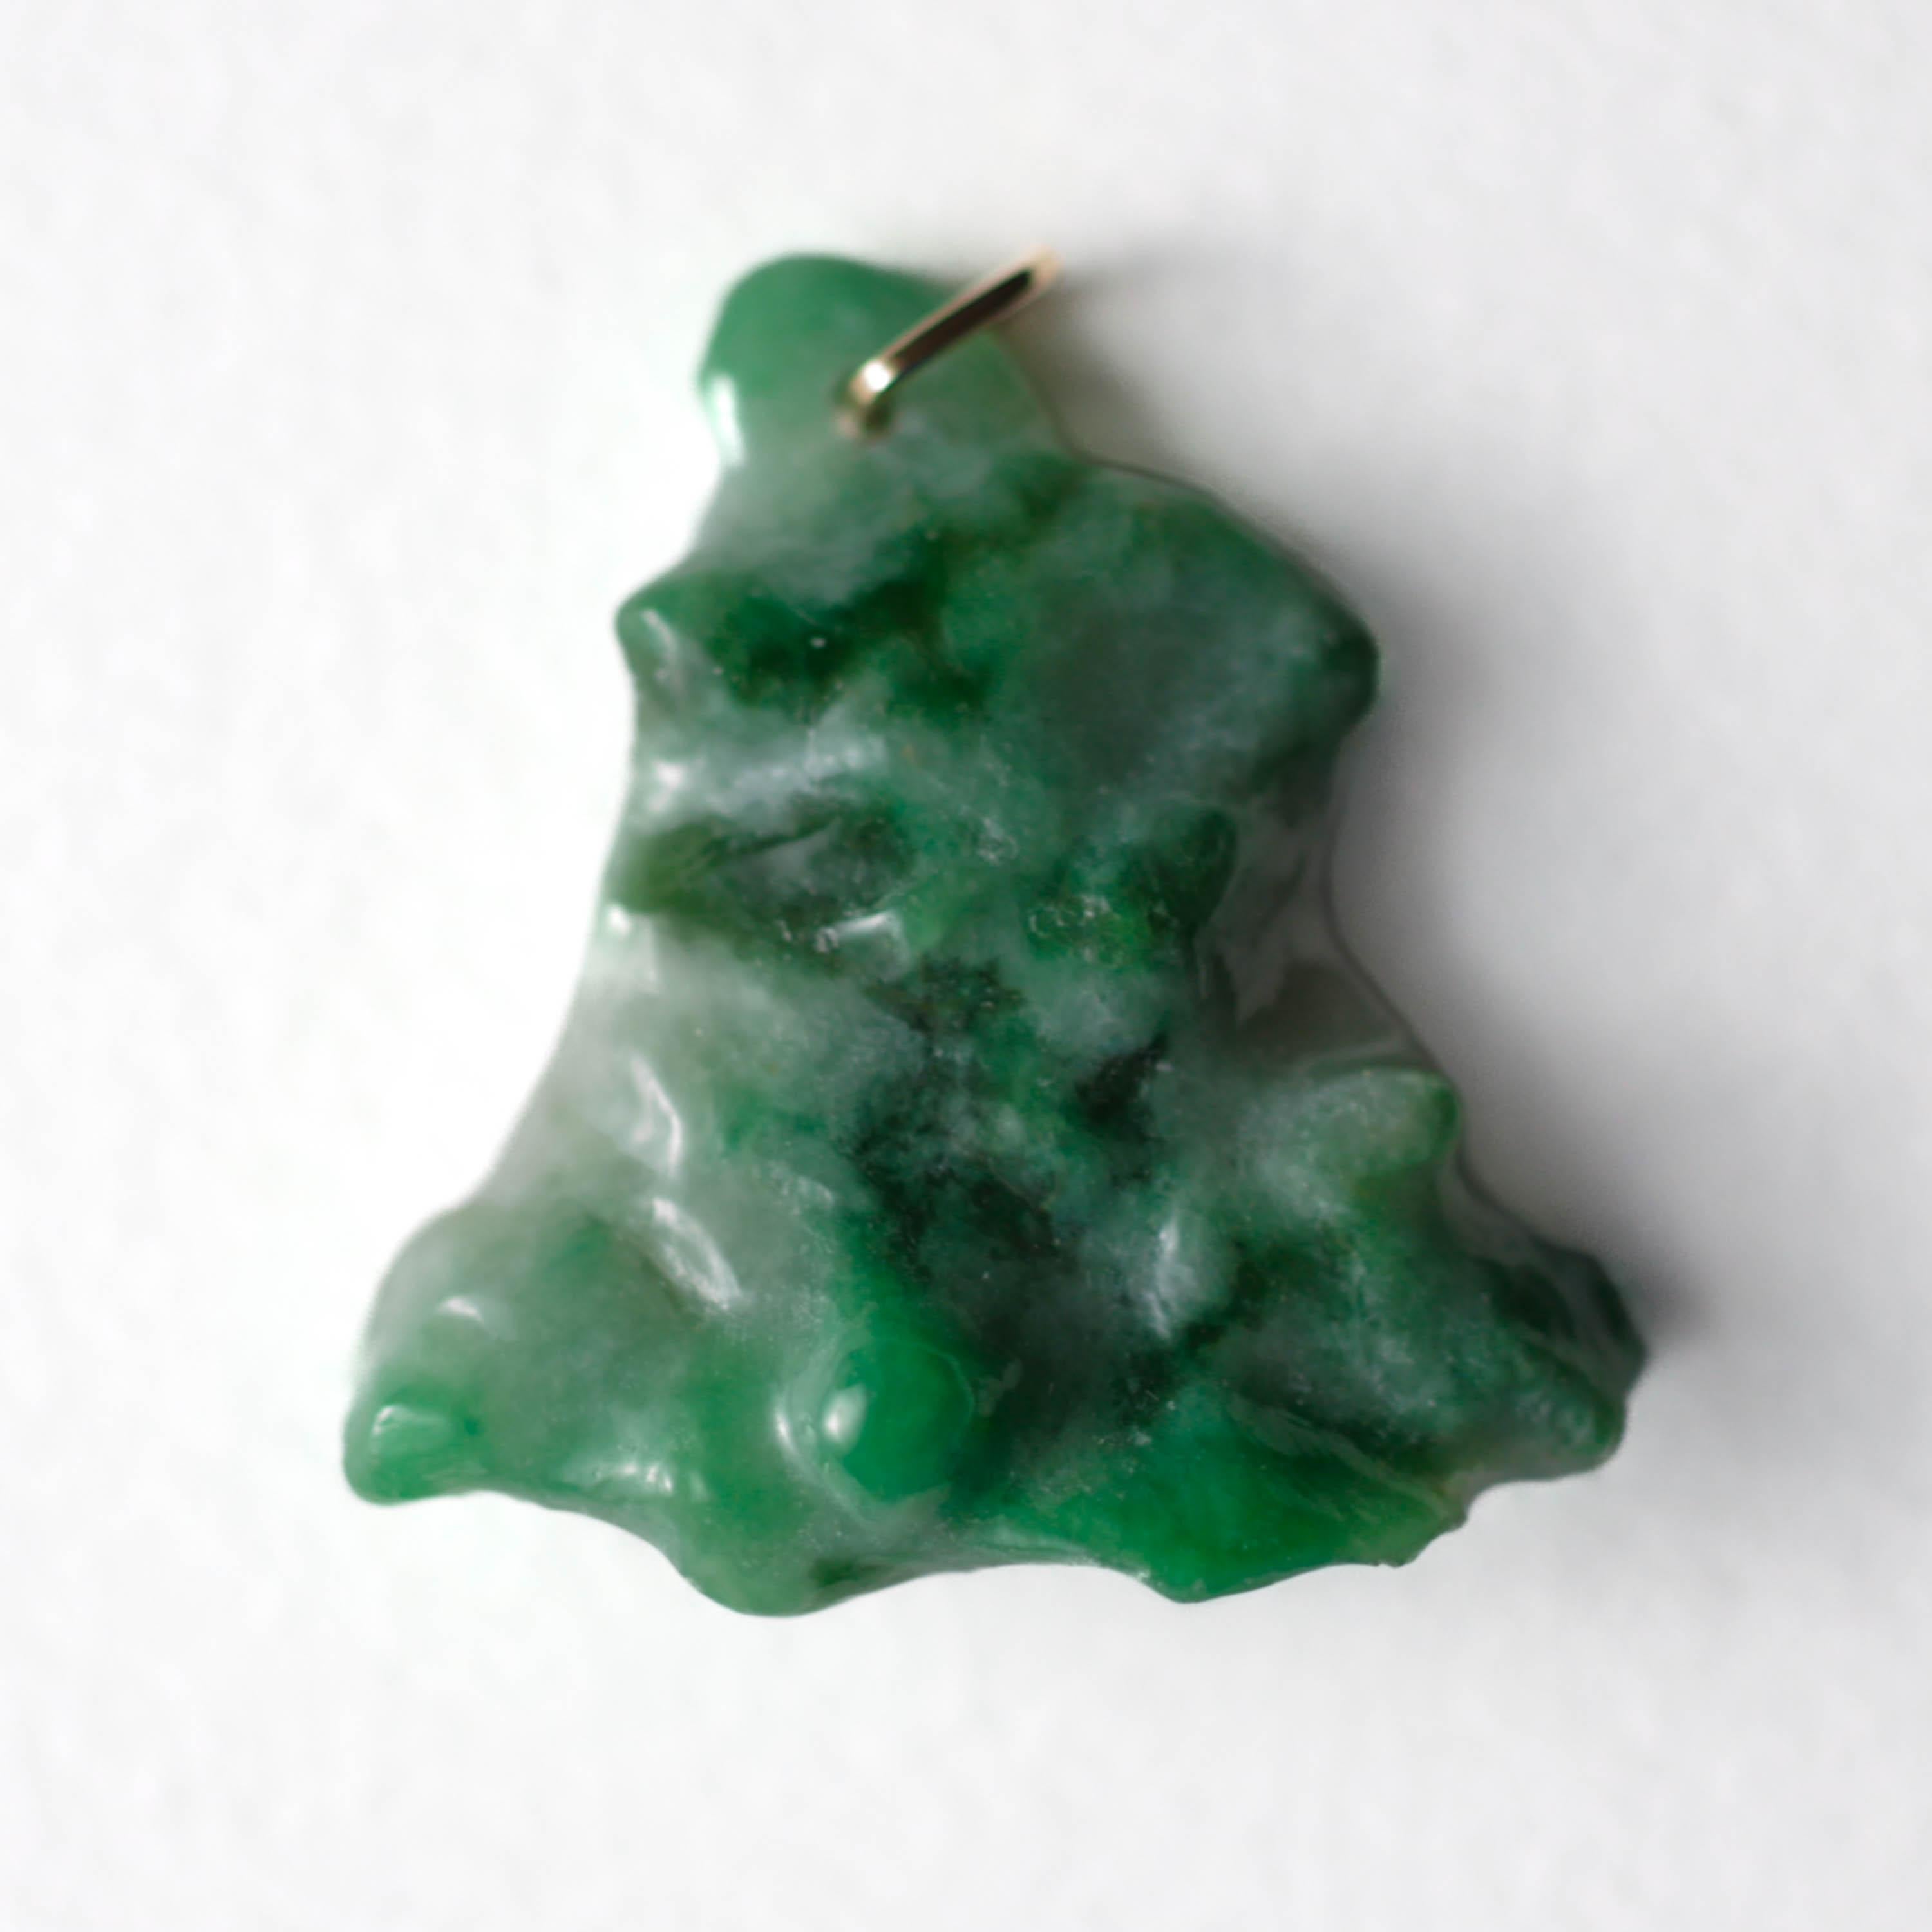 This is gorgeous, emerald-green mottled untreated Burmese jadeite jade stone has been hand carved in into a freeform triangular form. Though the jade is opaque, it is also highly translucent, so it looks beautiful under all lighting conditions. The